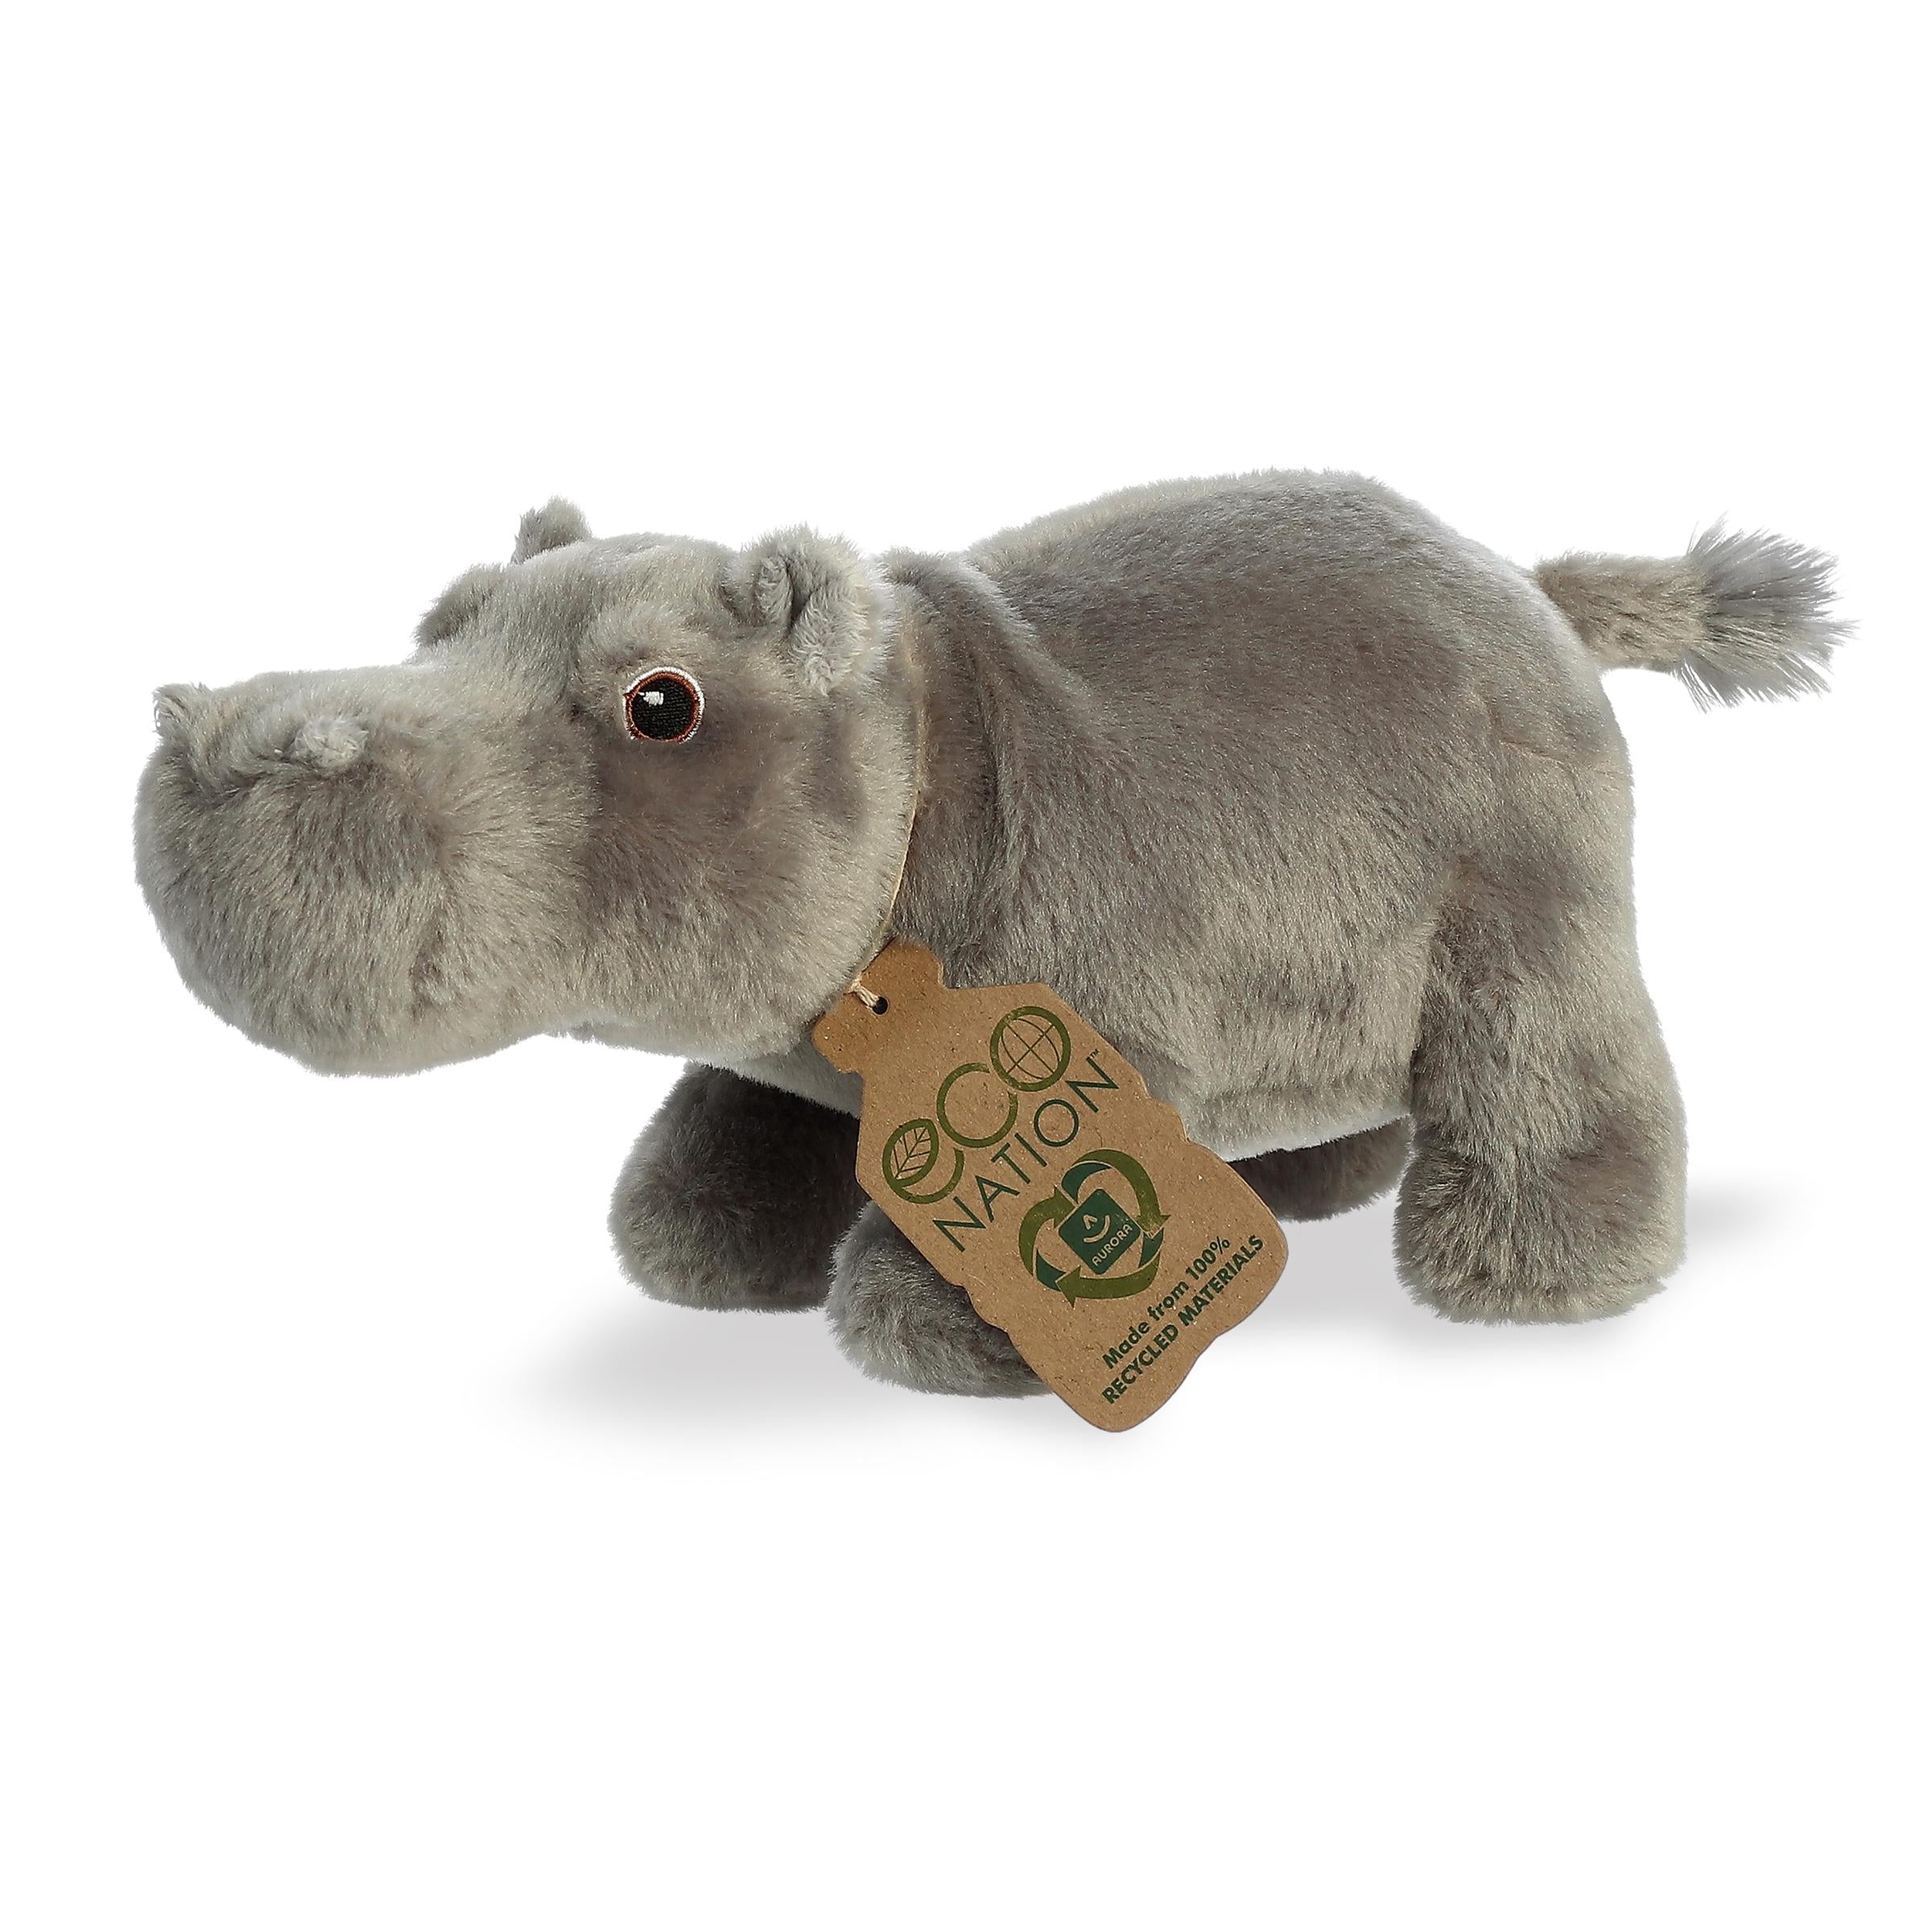 A captivating hippo plush with an all-grey coat, beautiful embroidered eyes, and an eco-nation tag around its neck